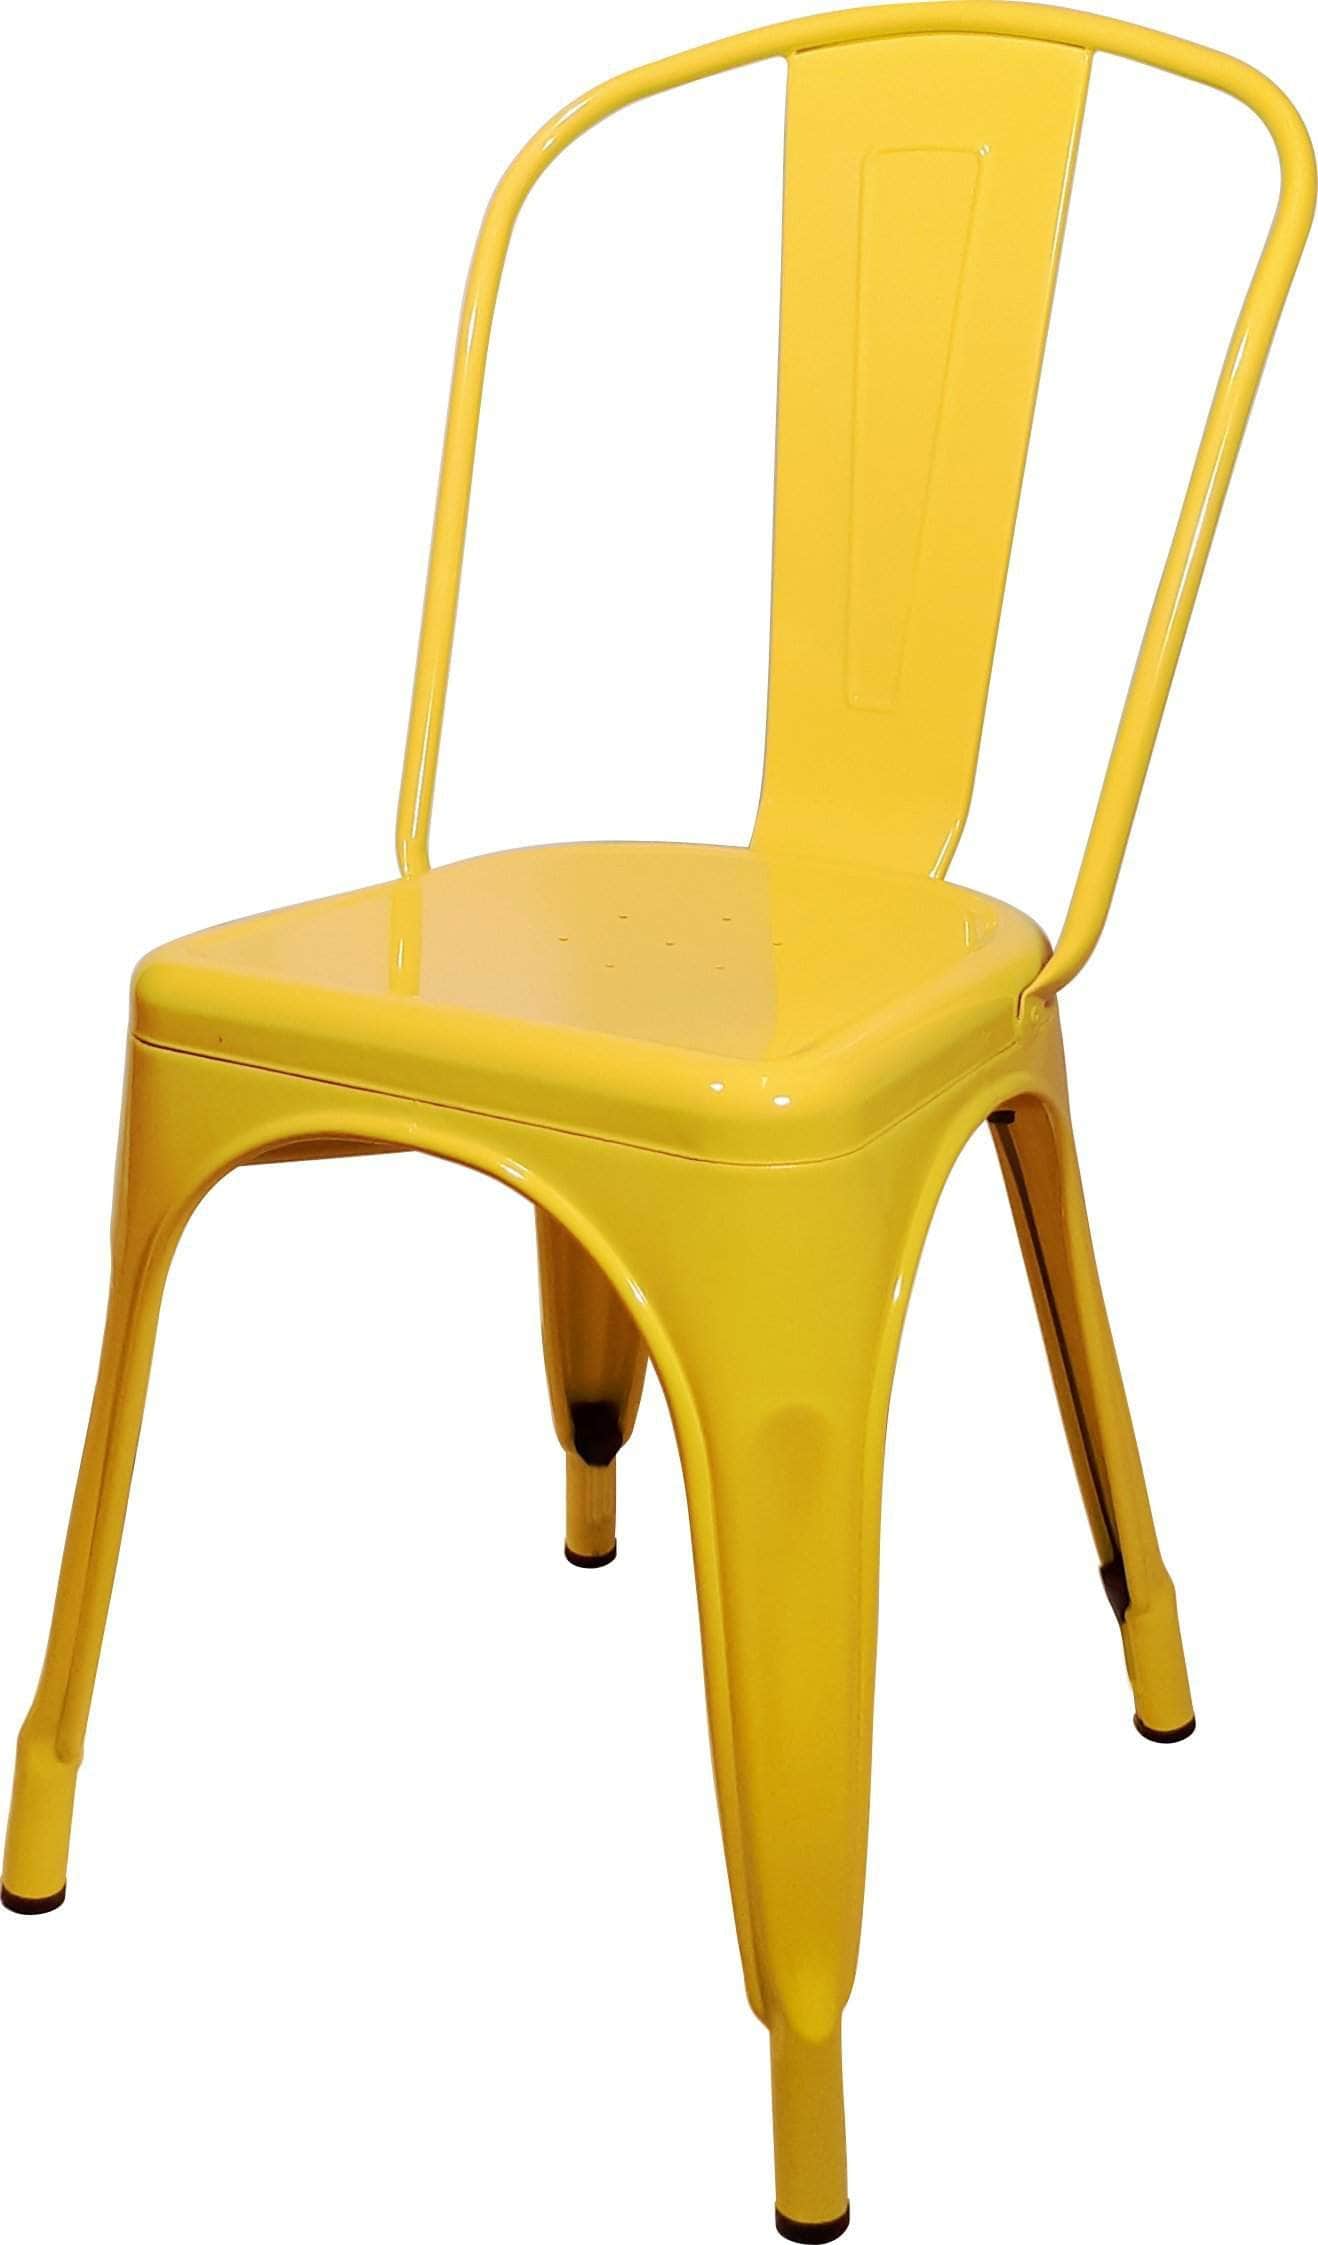 Tolix Replica Cafe Chair Yellow Buy Online Afterpay Available